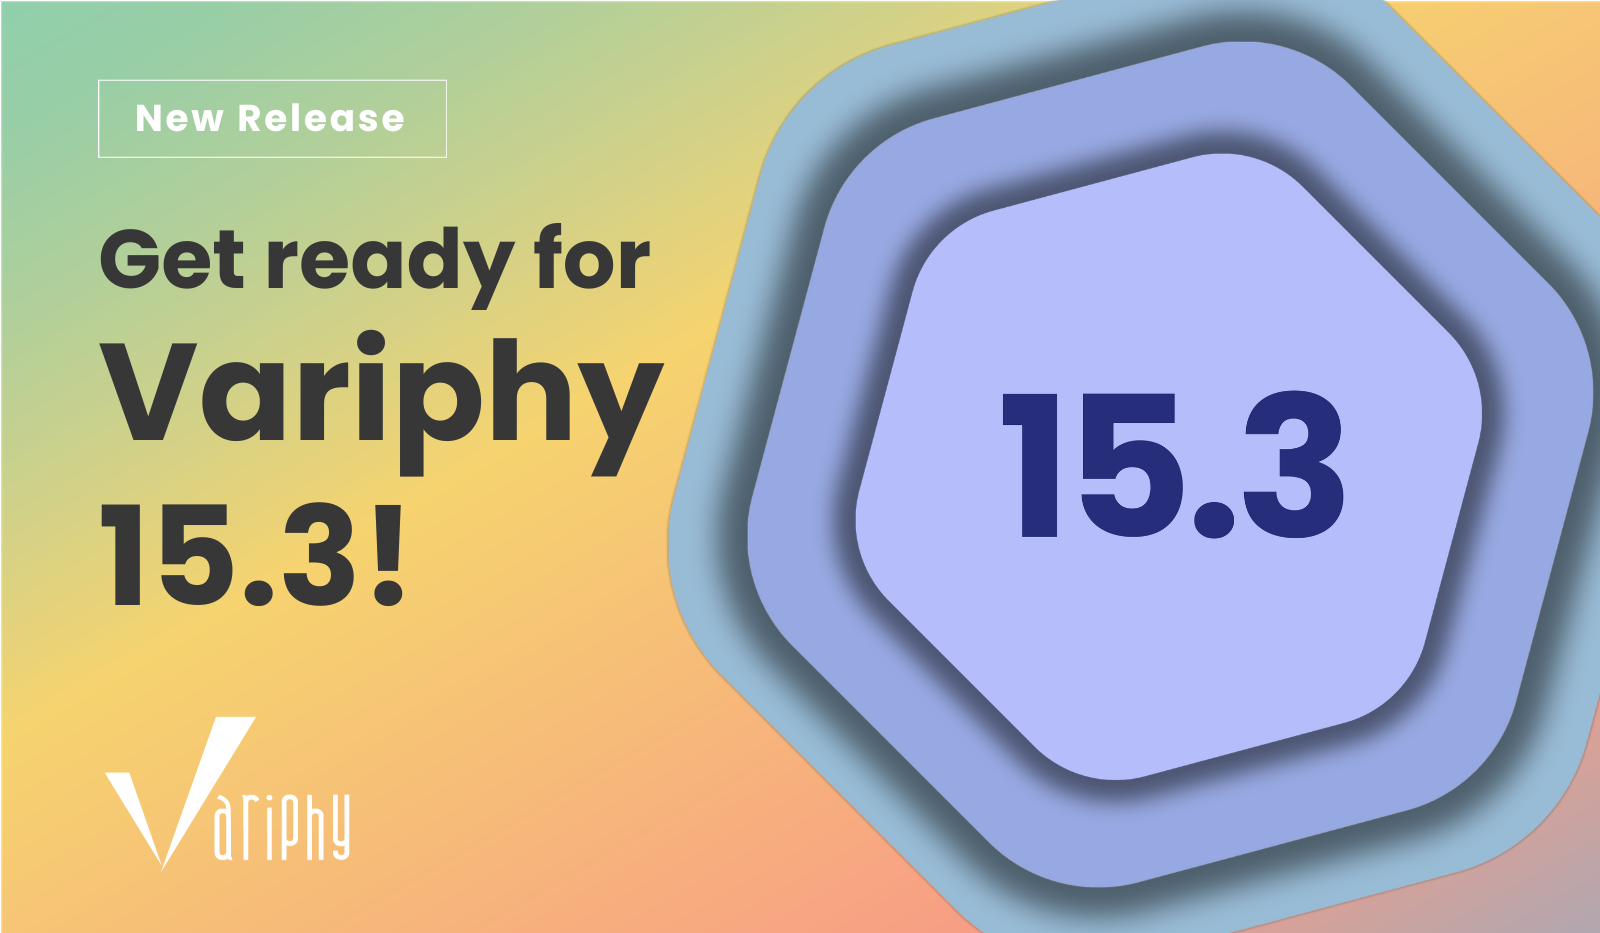 Get ready for Variphy 15.3